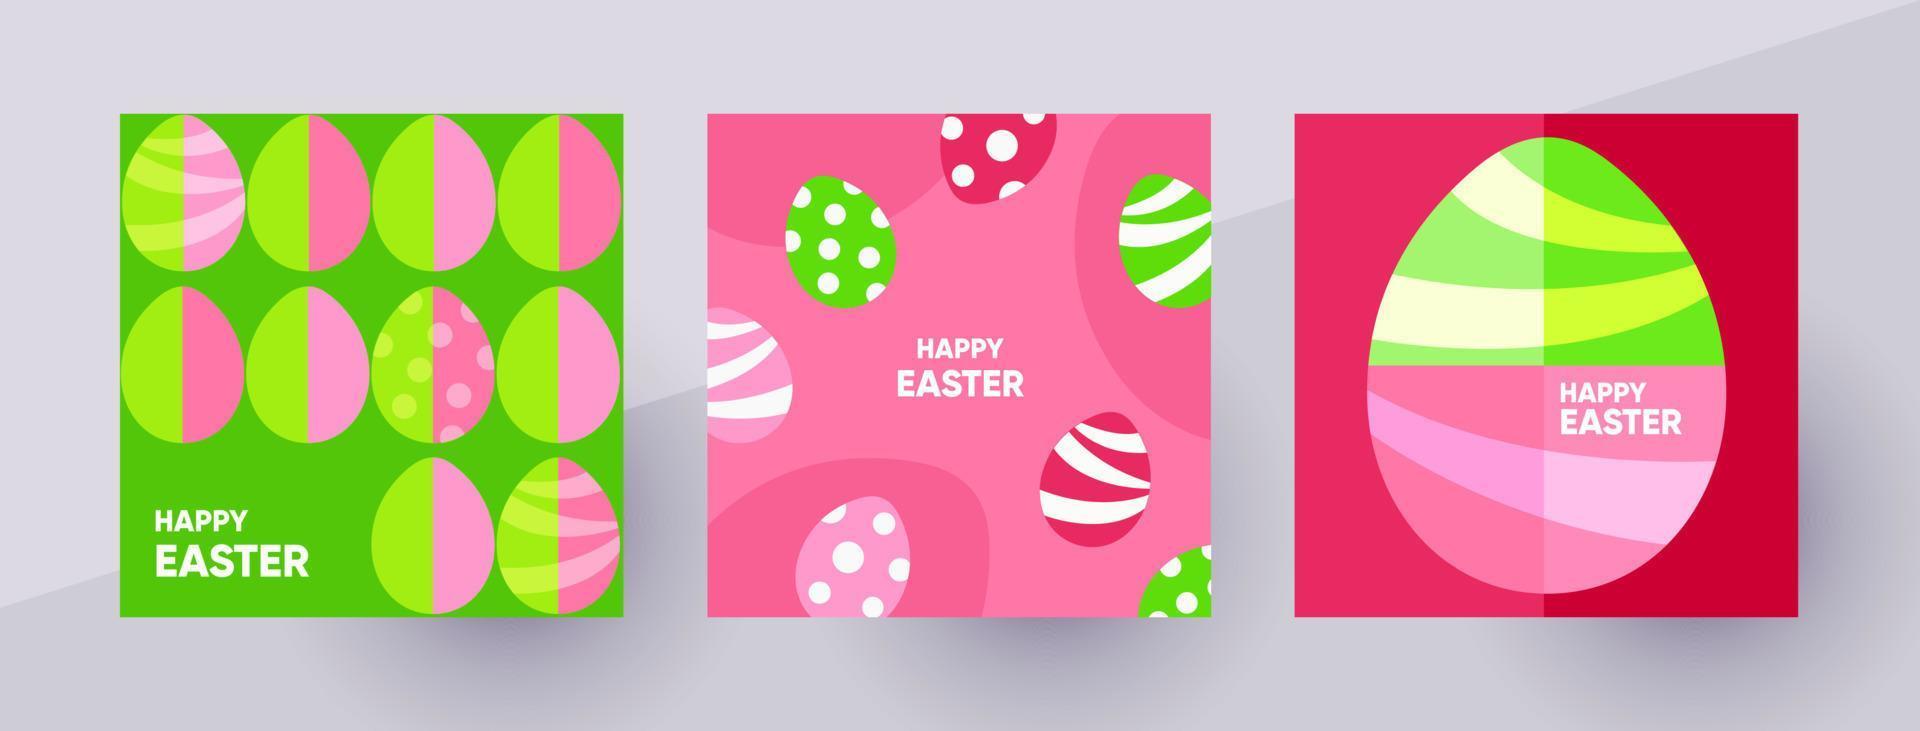 Happy Easter illustrations in minimalistic style. Easter eggs in vivid colors. Template for social media post, poster, card, flyer. Vector illustration.